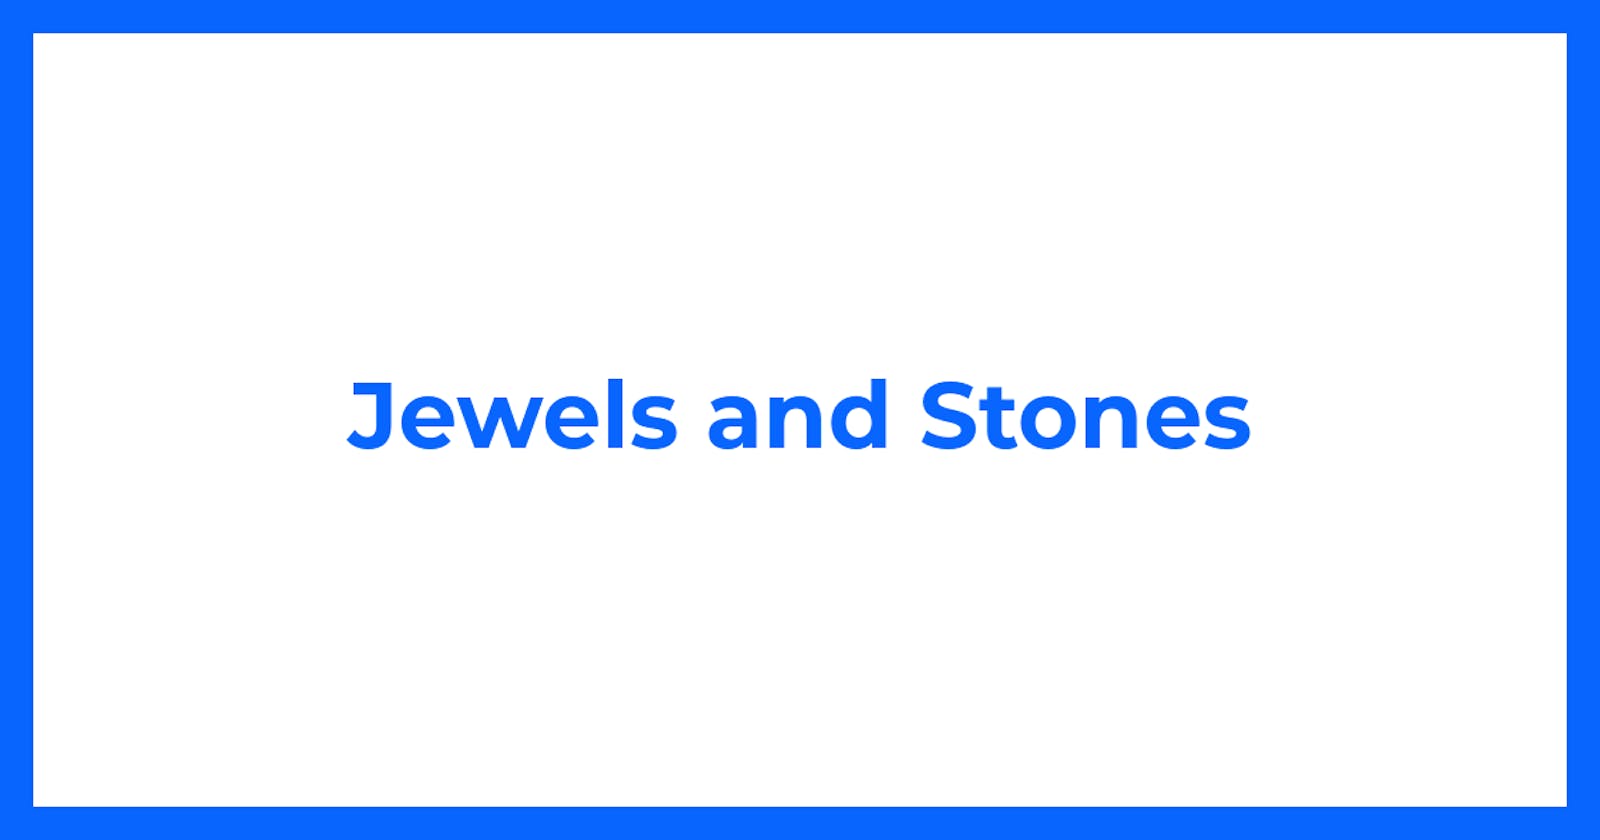 Jewels and Stones